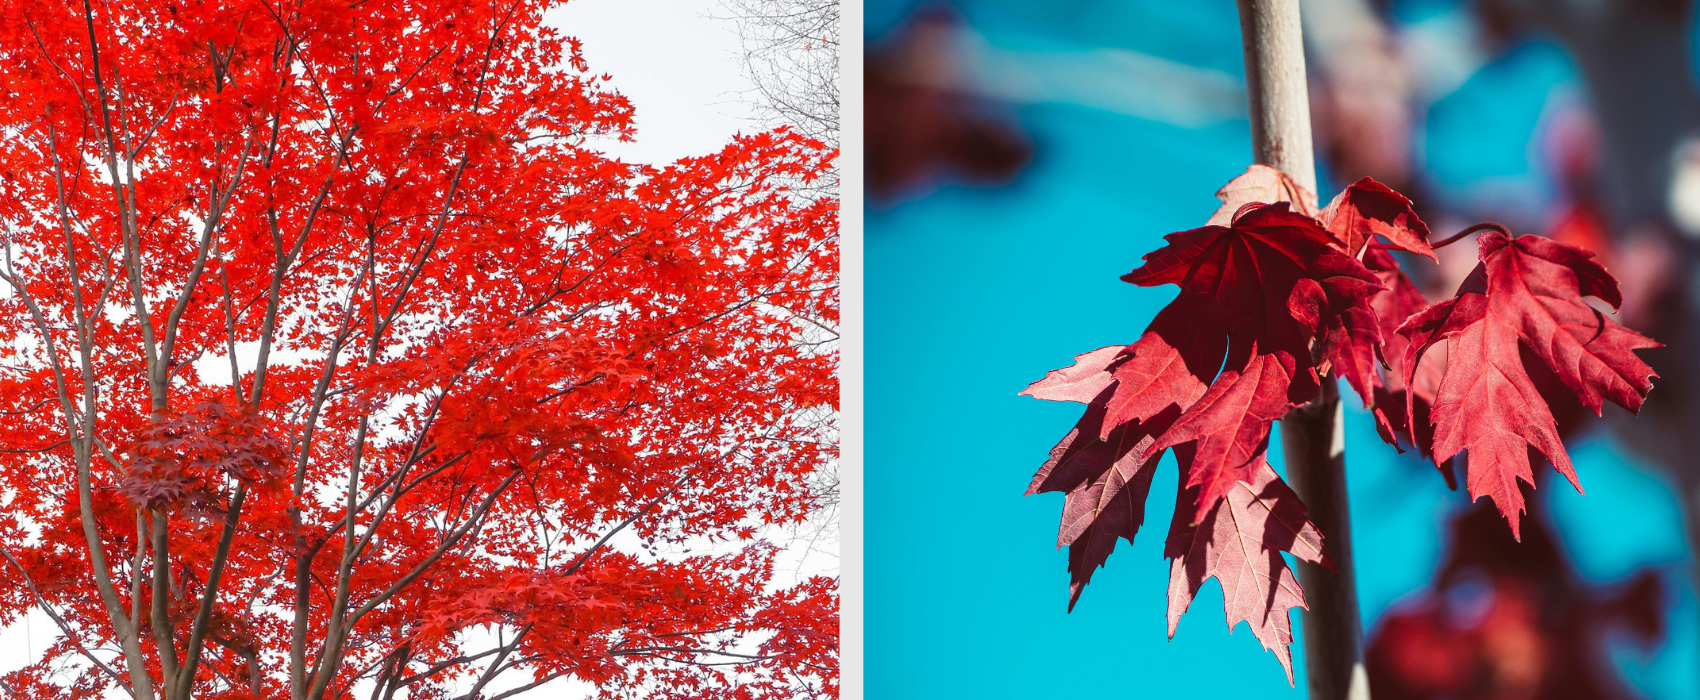 Red Maple tree with bright red leaves